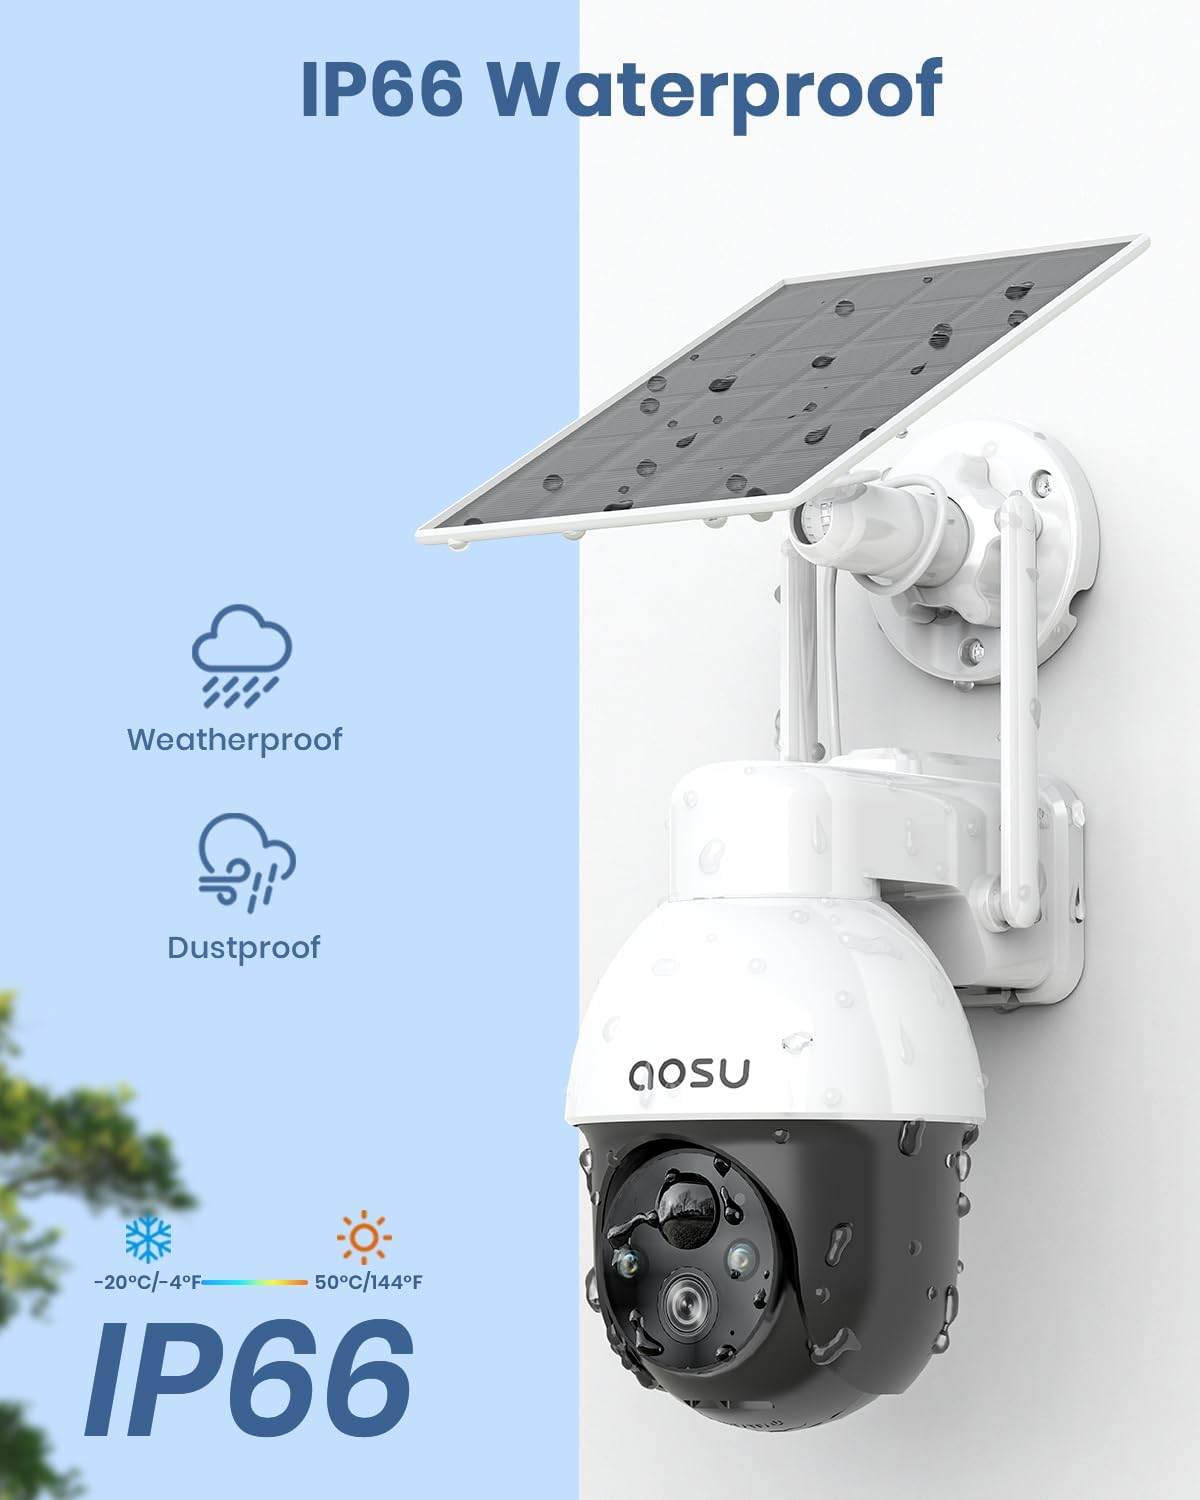 AOSU Solar Security Camera Wireless Outdoor with Panoramic PTZ, Human Auto Tracking, 2K Night Vision, Light and Sound Alarm, 2-Way Talk, Compatible with Alexa/Google Assistant for Home Surveillance